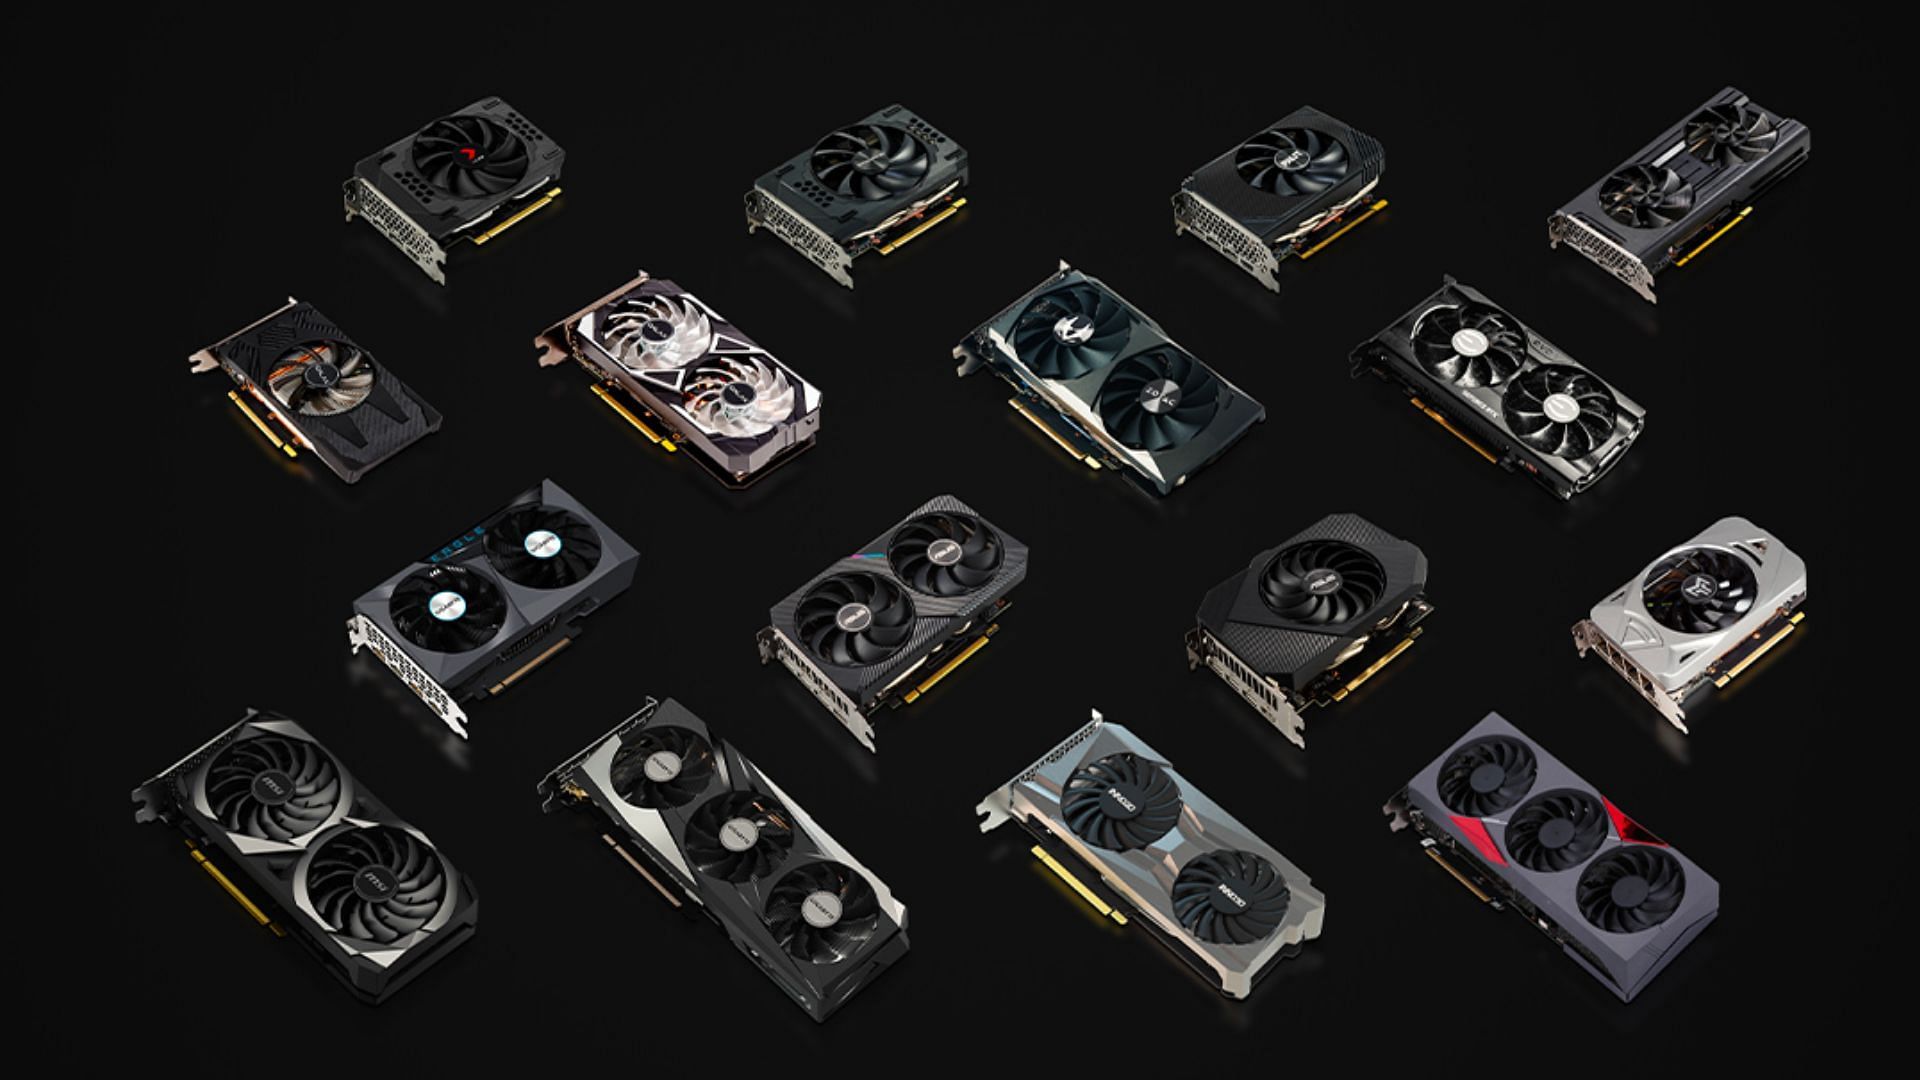 The RTX 3050 supports ray tracing and DLSS for gaming (Image via Nvidia)